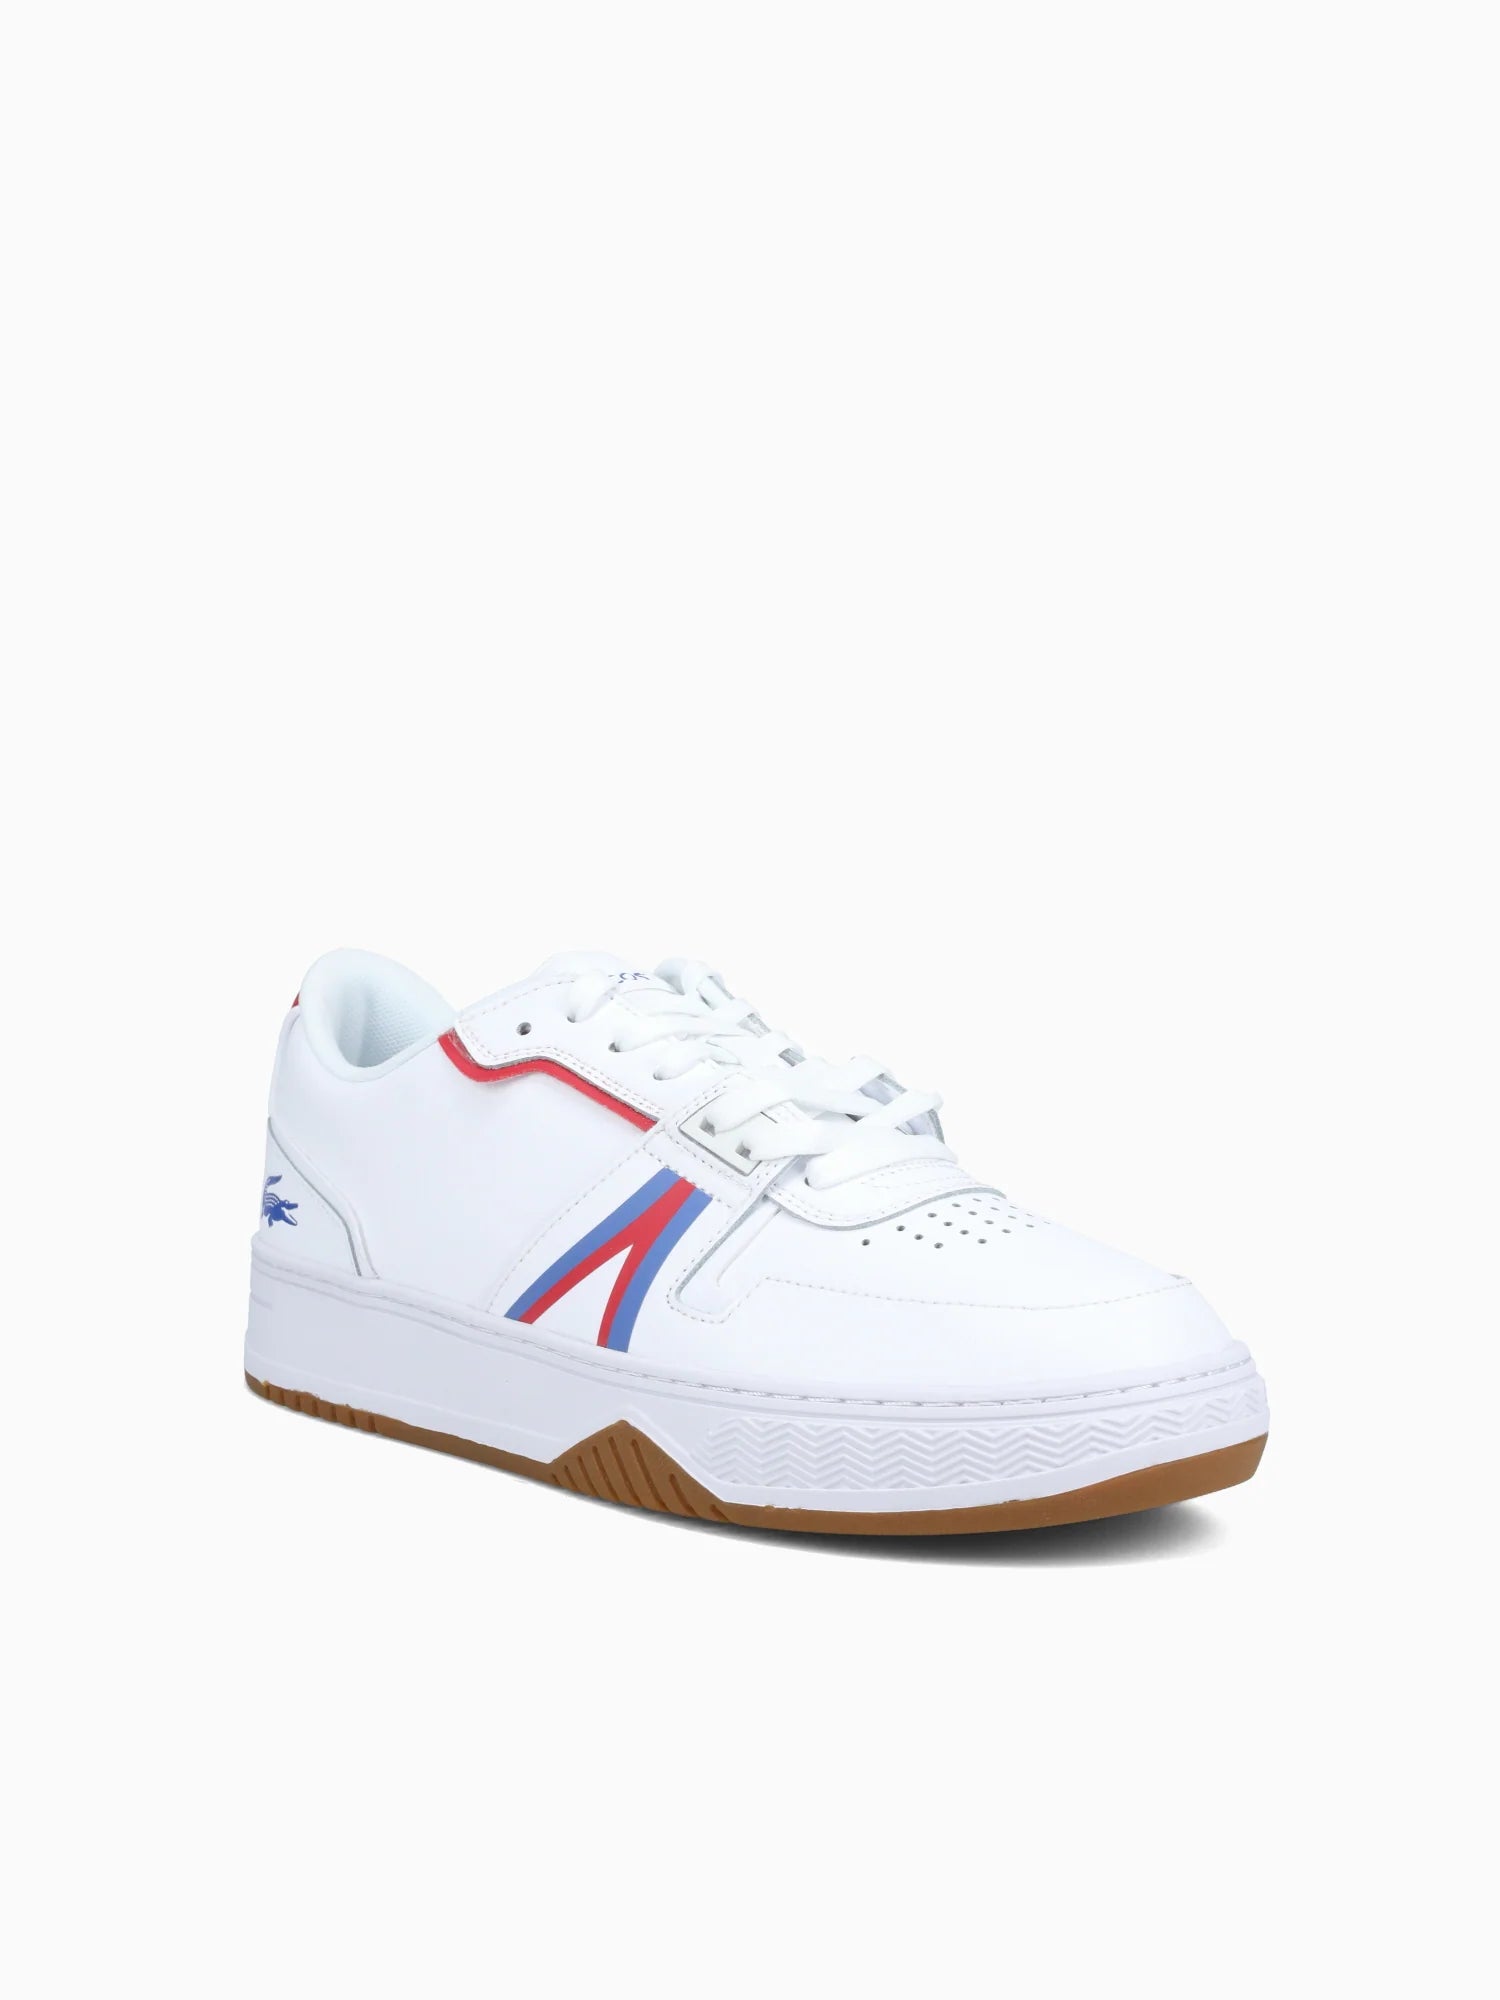 L001 Contrasted Leather Sneakers white/red/blue